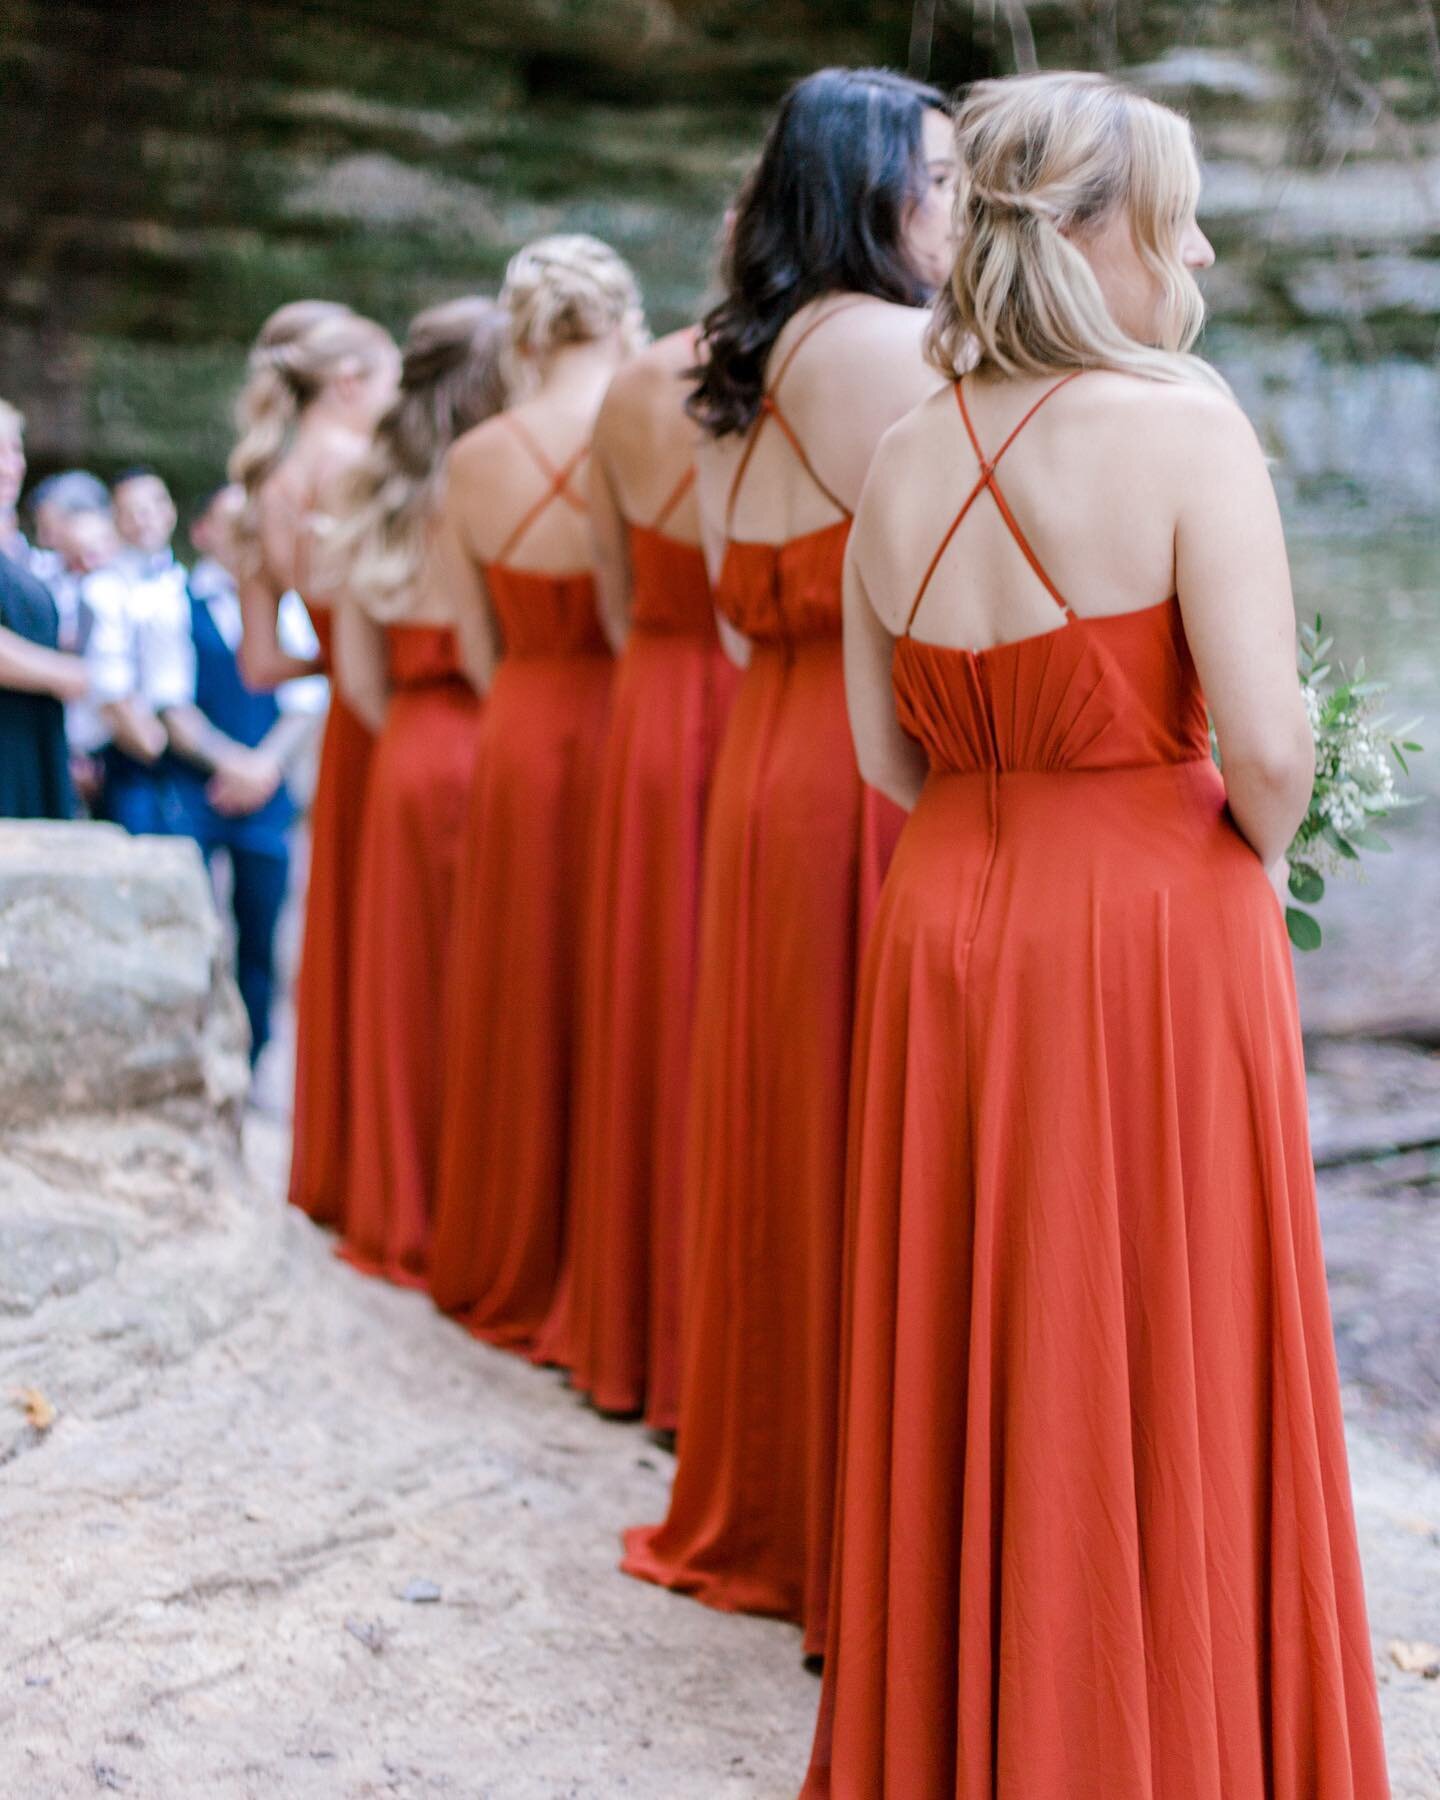 A fun advantage to an elopement in a state park? Getting cool vantage points of everyone involved in the ceremony. This was moments before Tera and her dad walked up to the alter. Also these dresses got quite the stream of compliments from fellow hik